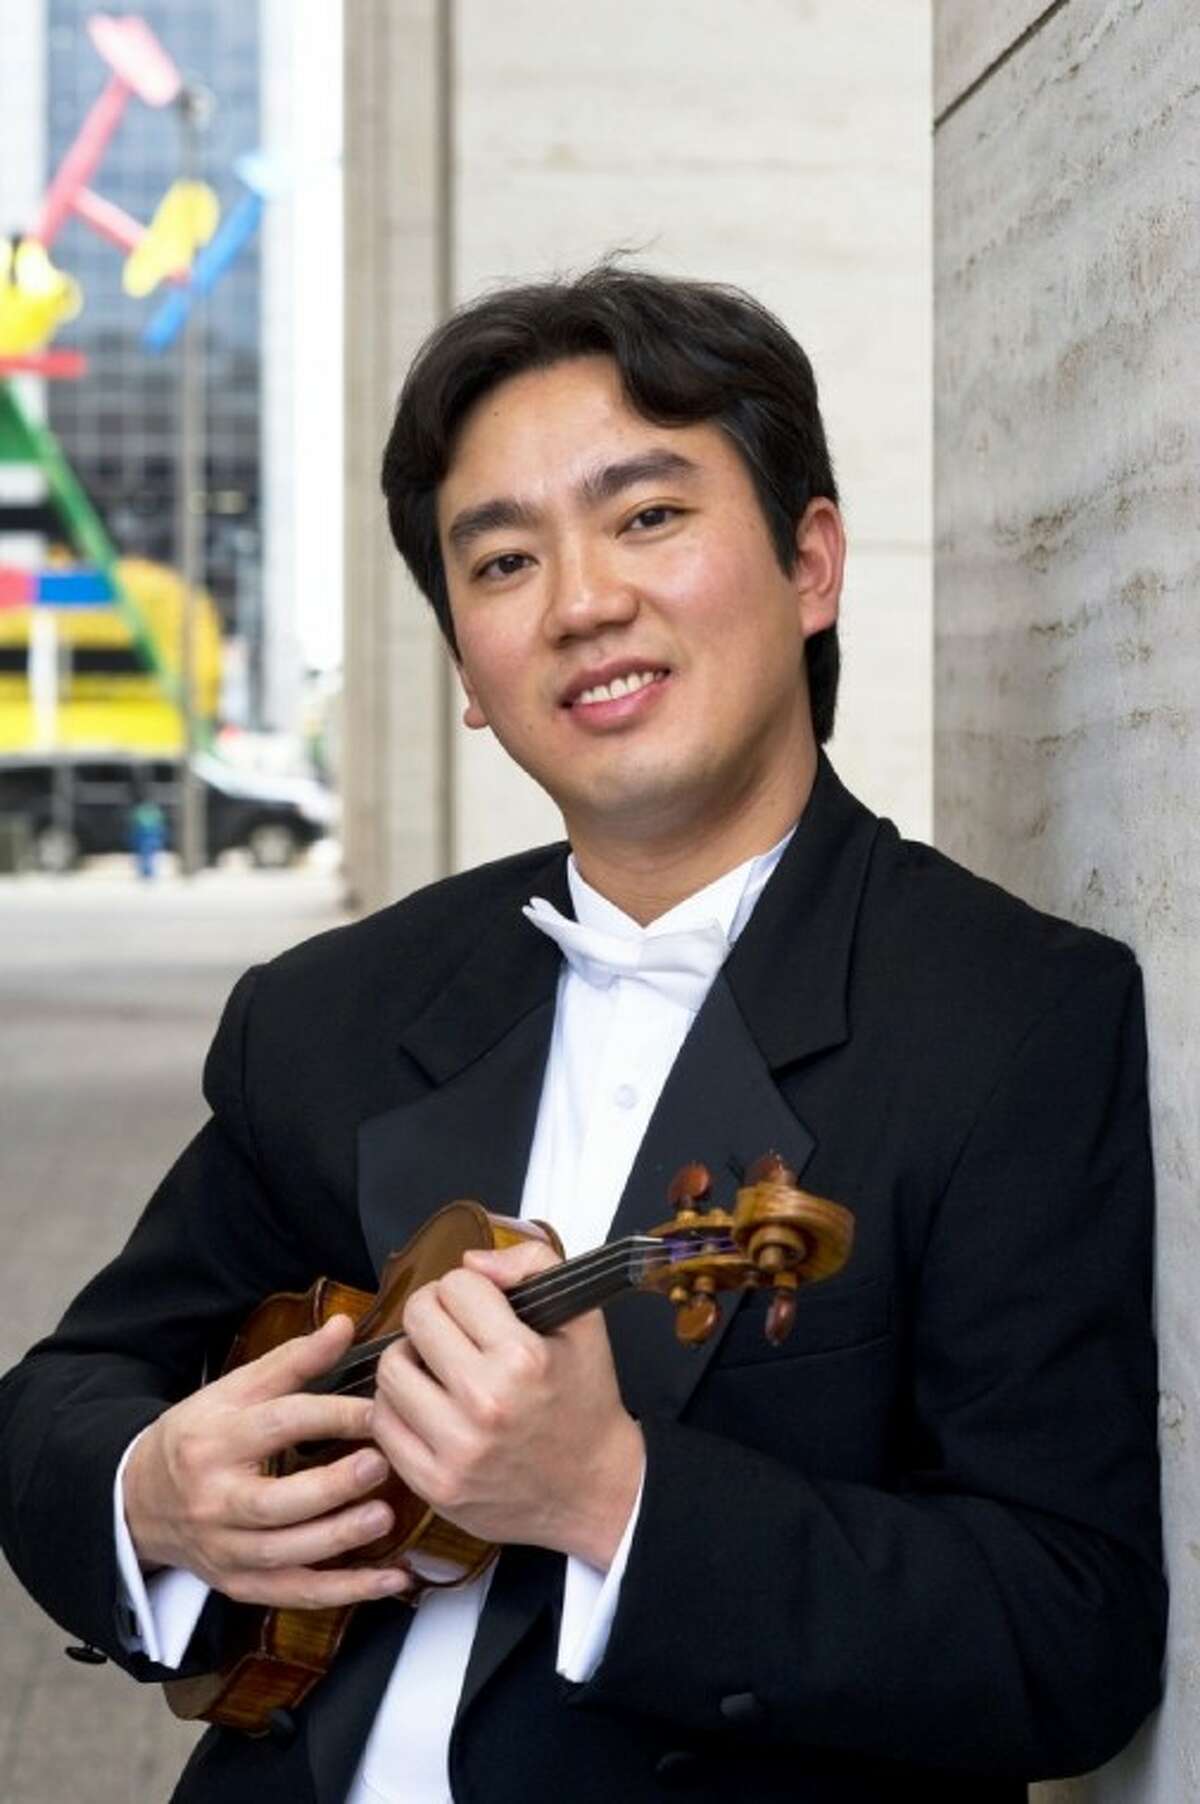 Special guest, Frank Huang, joins the Houston Symphony at Evening with Brahms Sept. 21 at The Cynthia Woods Mitchell Pavilion. Huang is a violinist performs with the symphony three works of Johannes Brahms.